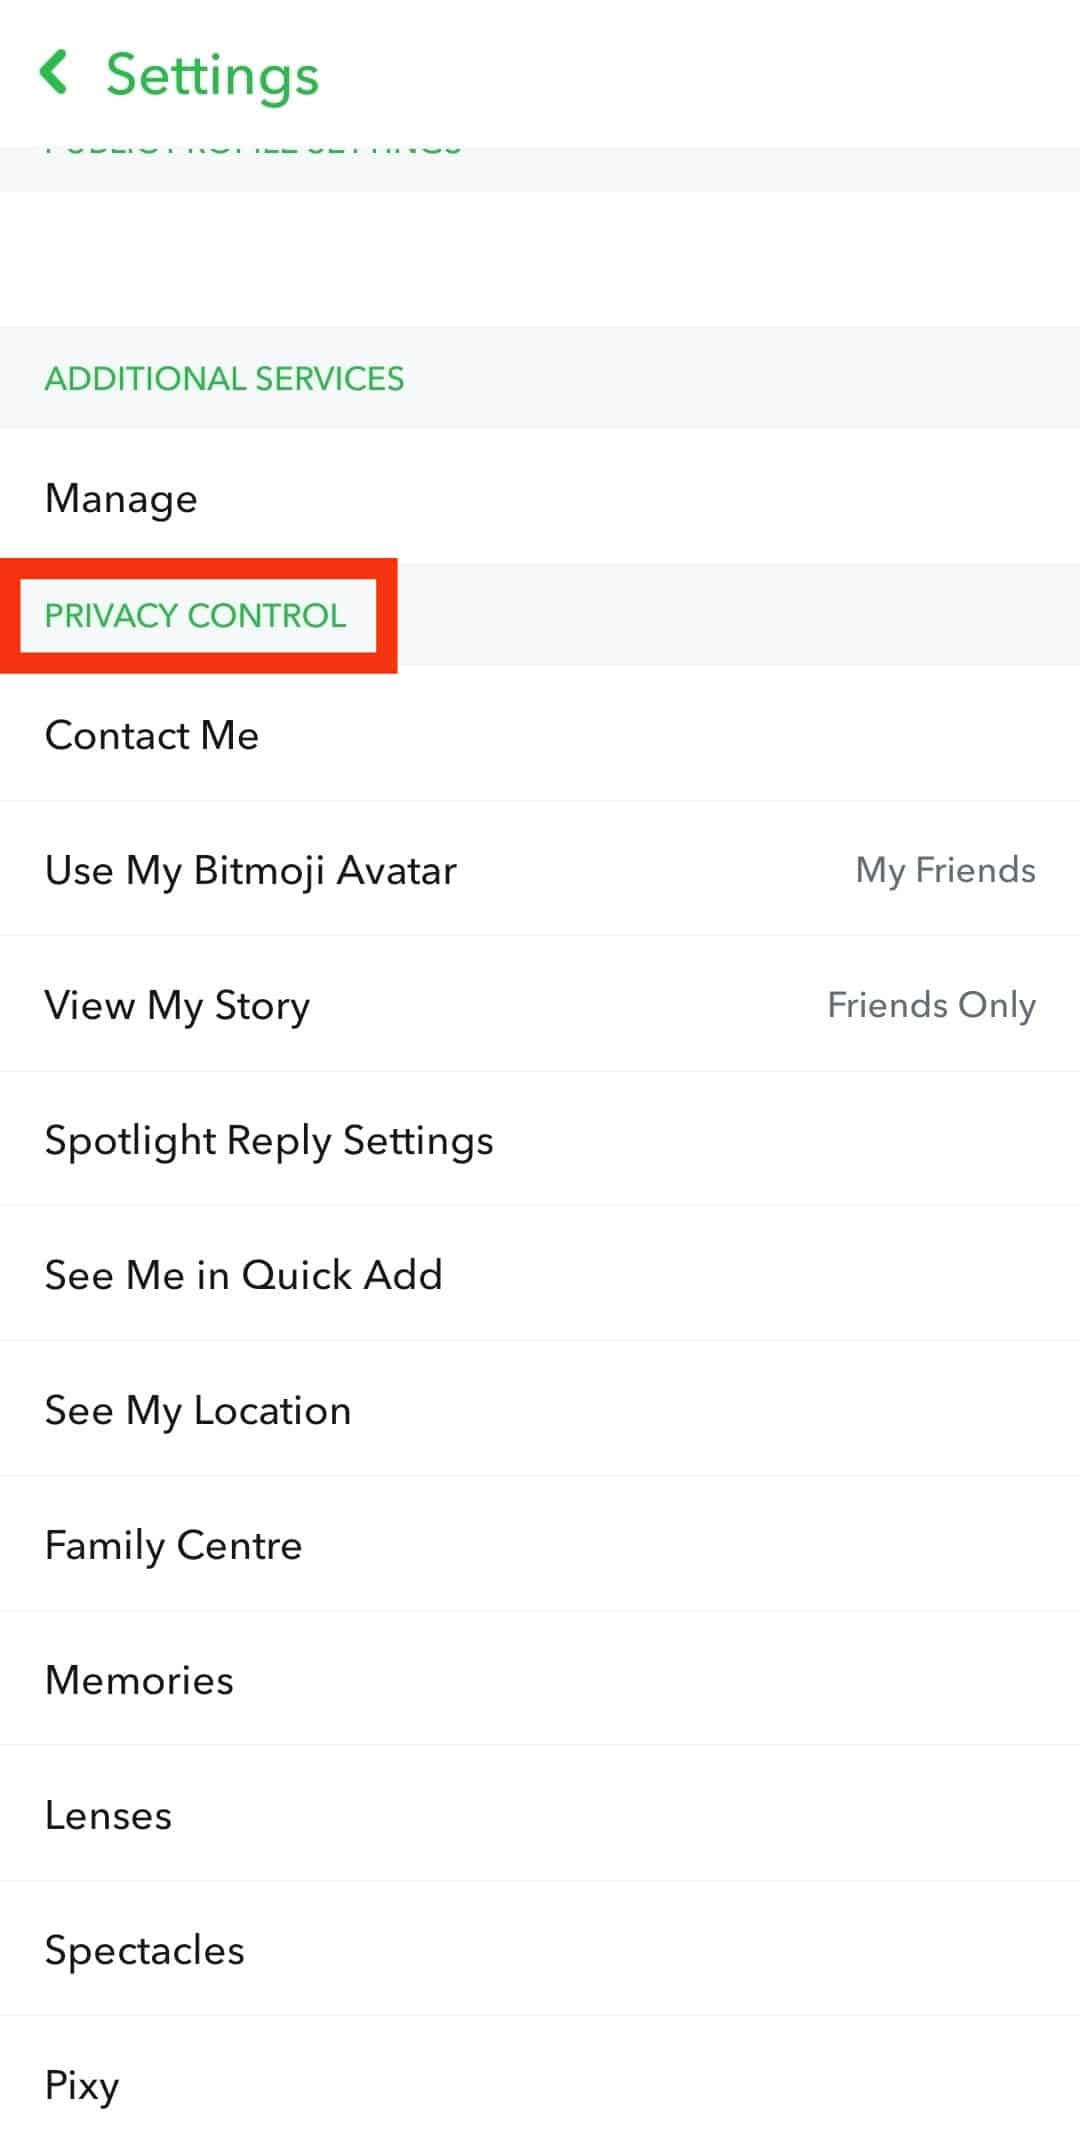 Scroll Down To The Privacy Control Section